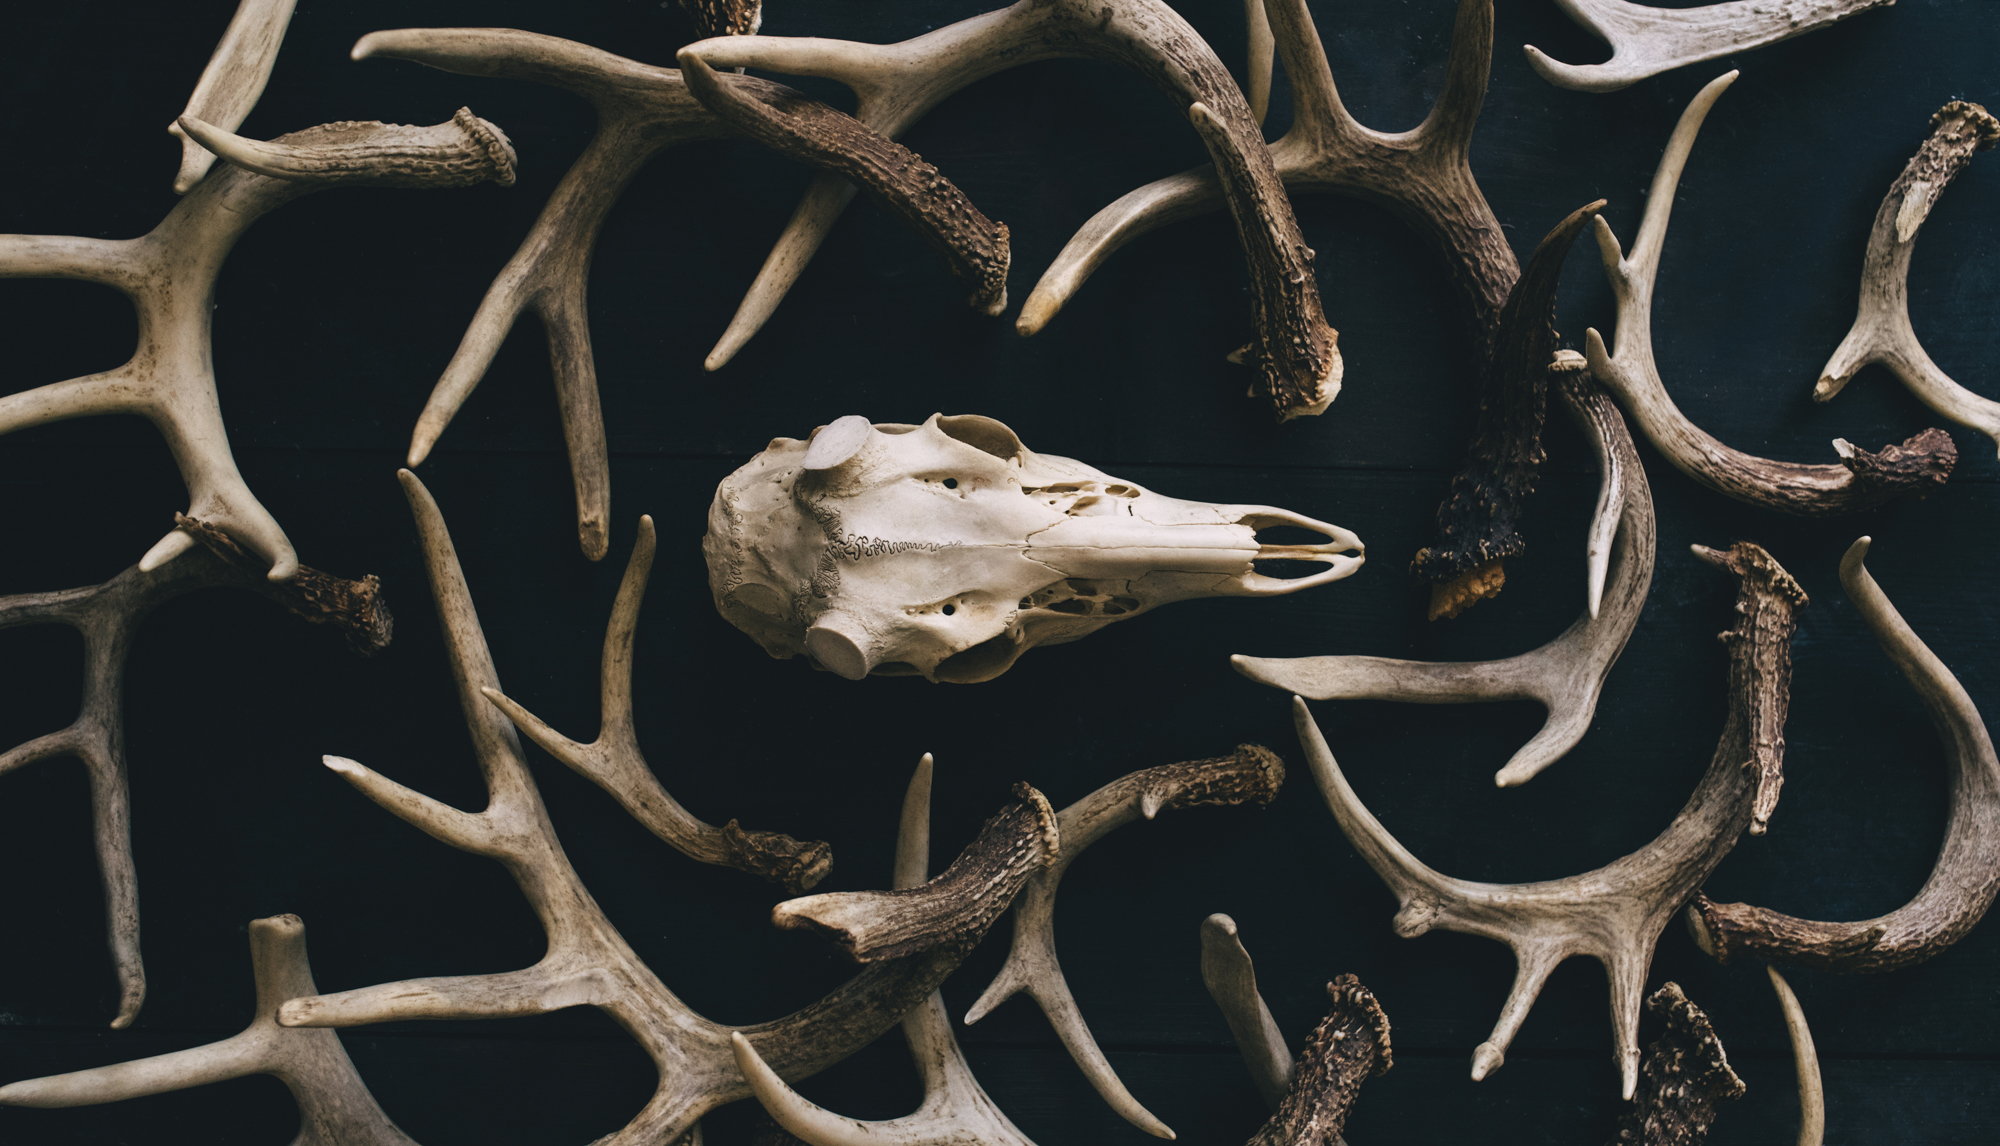 Thieves are sawing antlers off skulls and selling them to shed buyers.